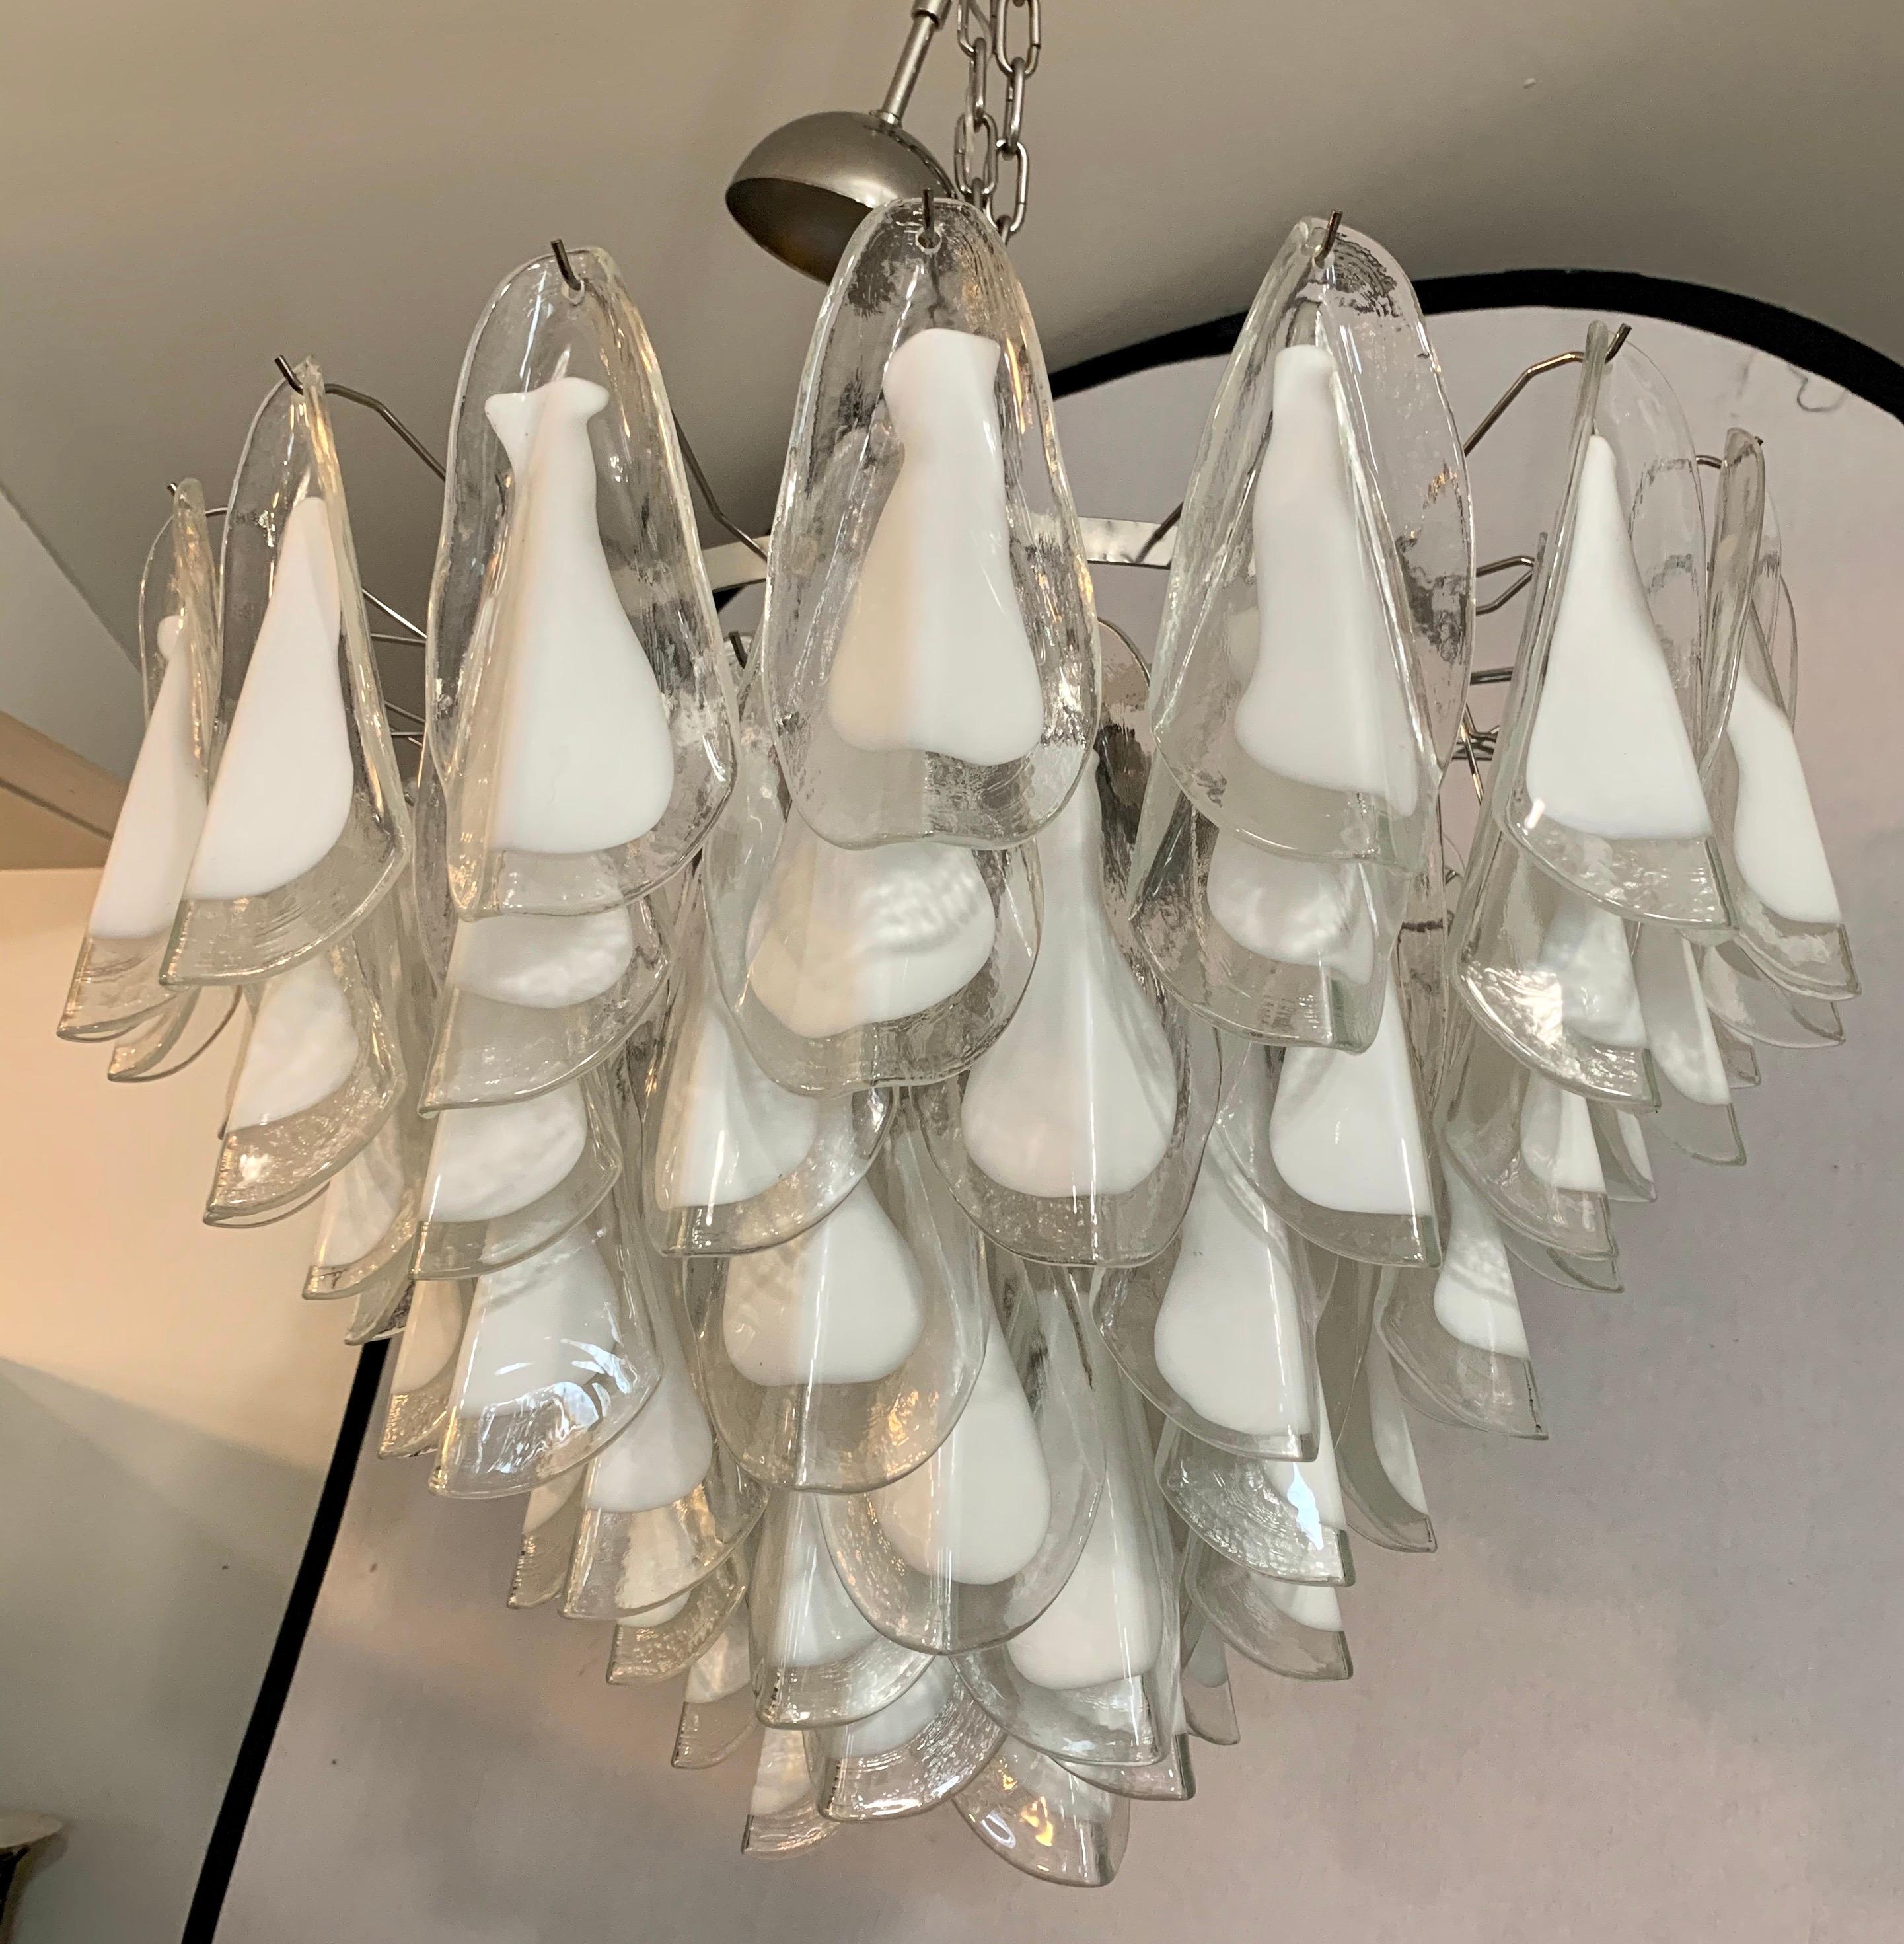 Stunning Mid-Century Modern Murano glass waterfall chandelier where the individual Murano glass
pieces are shaped like oyster shells. Nothing short of magnificent. Wired for USA and in working order. Now, more than ever, home is where the heart is.